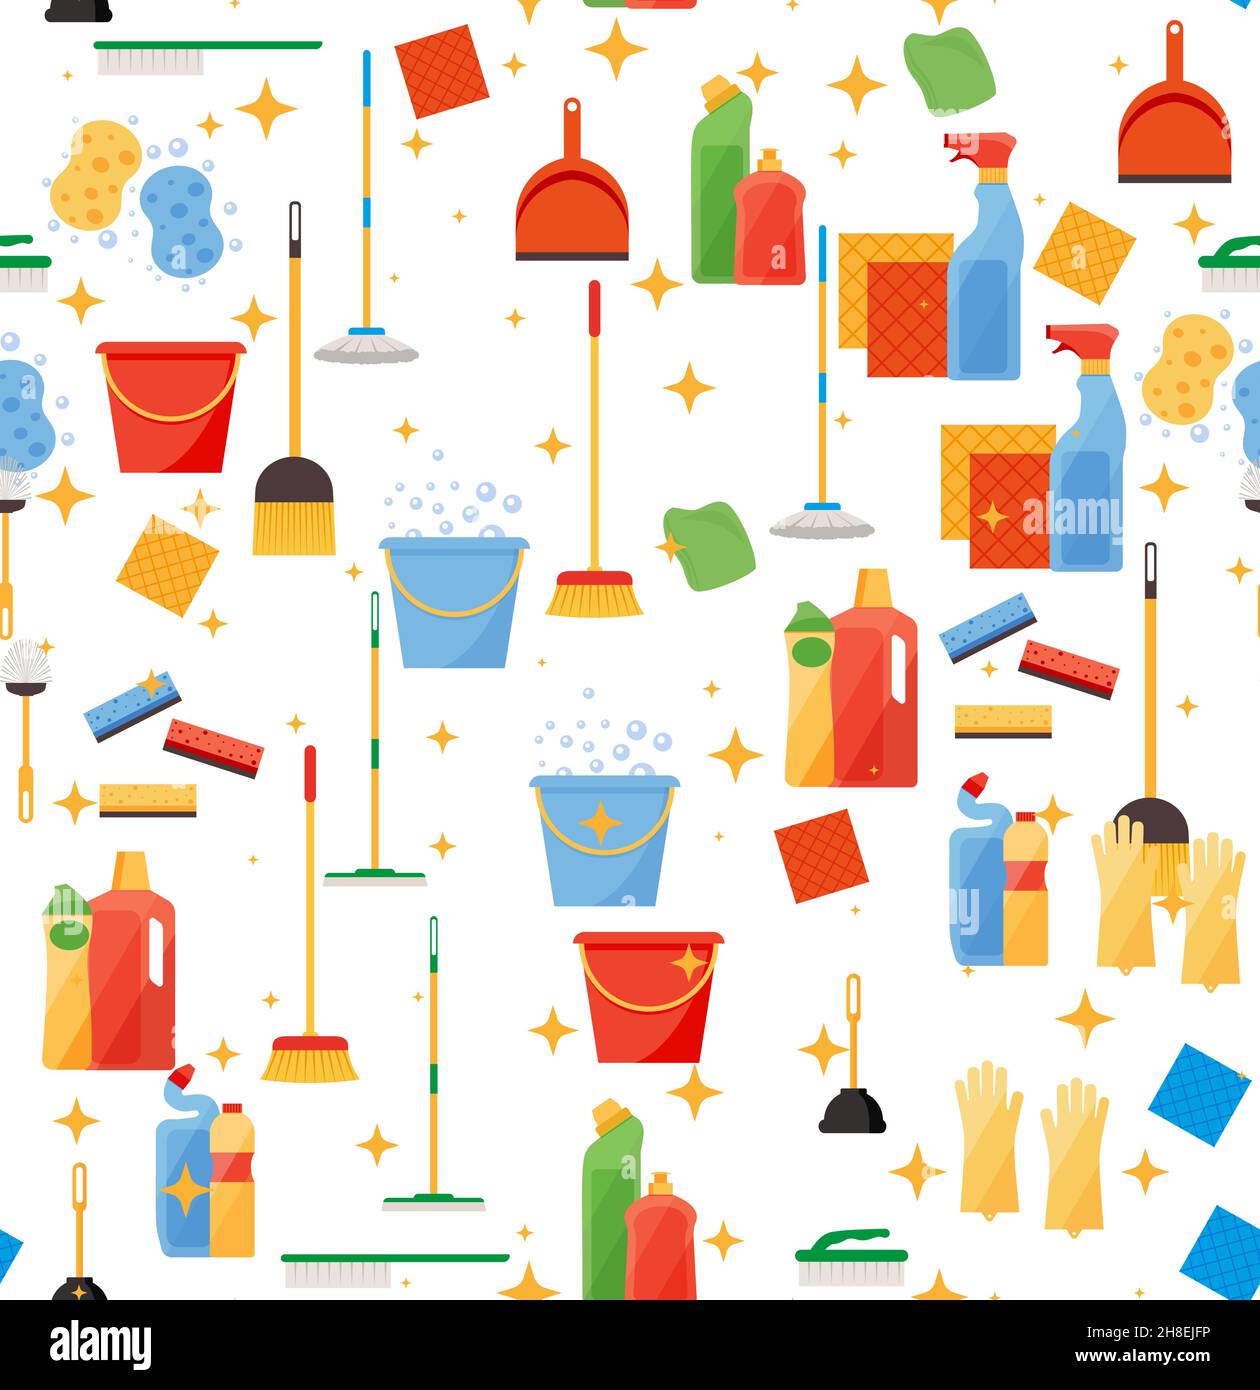 Assorted cleaning items set with brooms, bucket, mops, spray, brushes, sponges. Seamless pattern Eps 10 Stock Vector